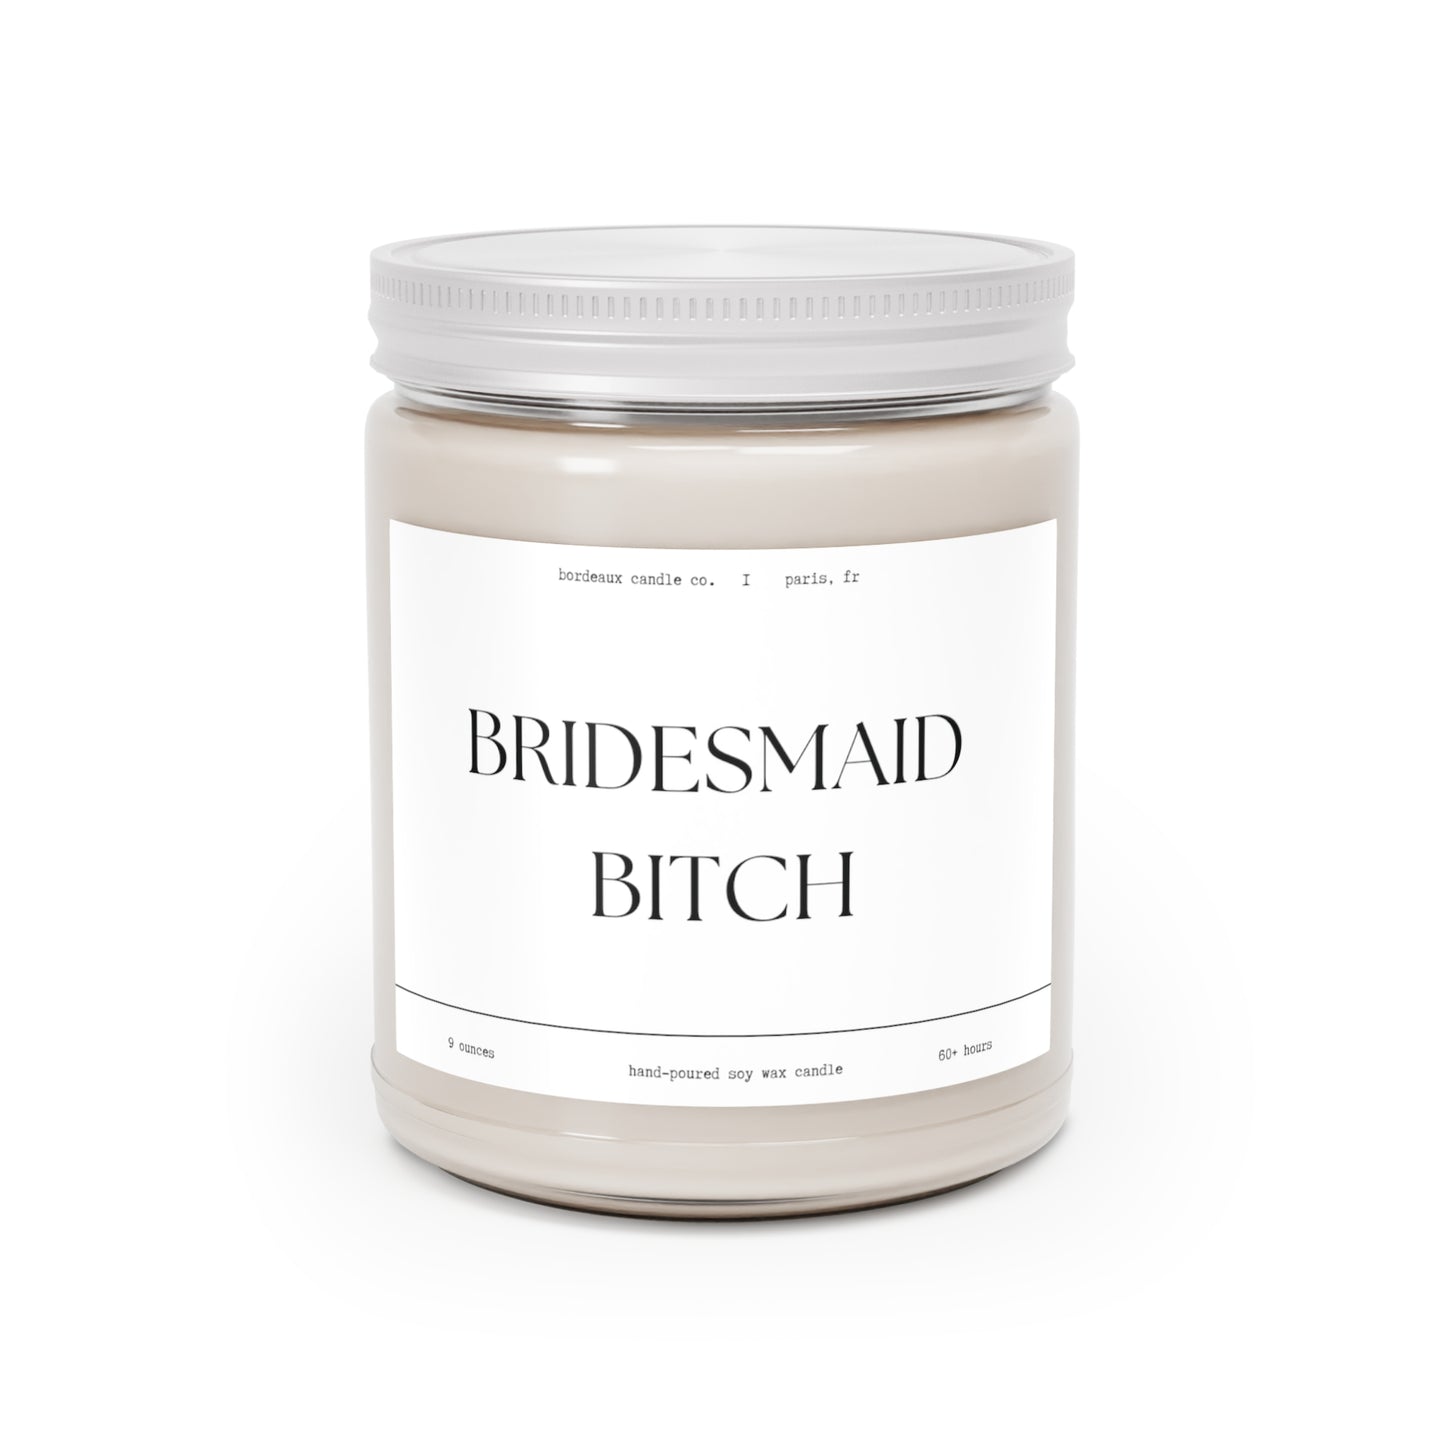 Bridesmaid B*tch, Scented Candle, 9oz,